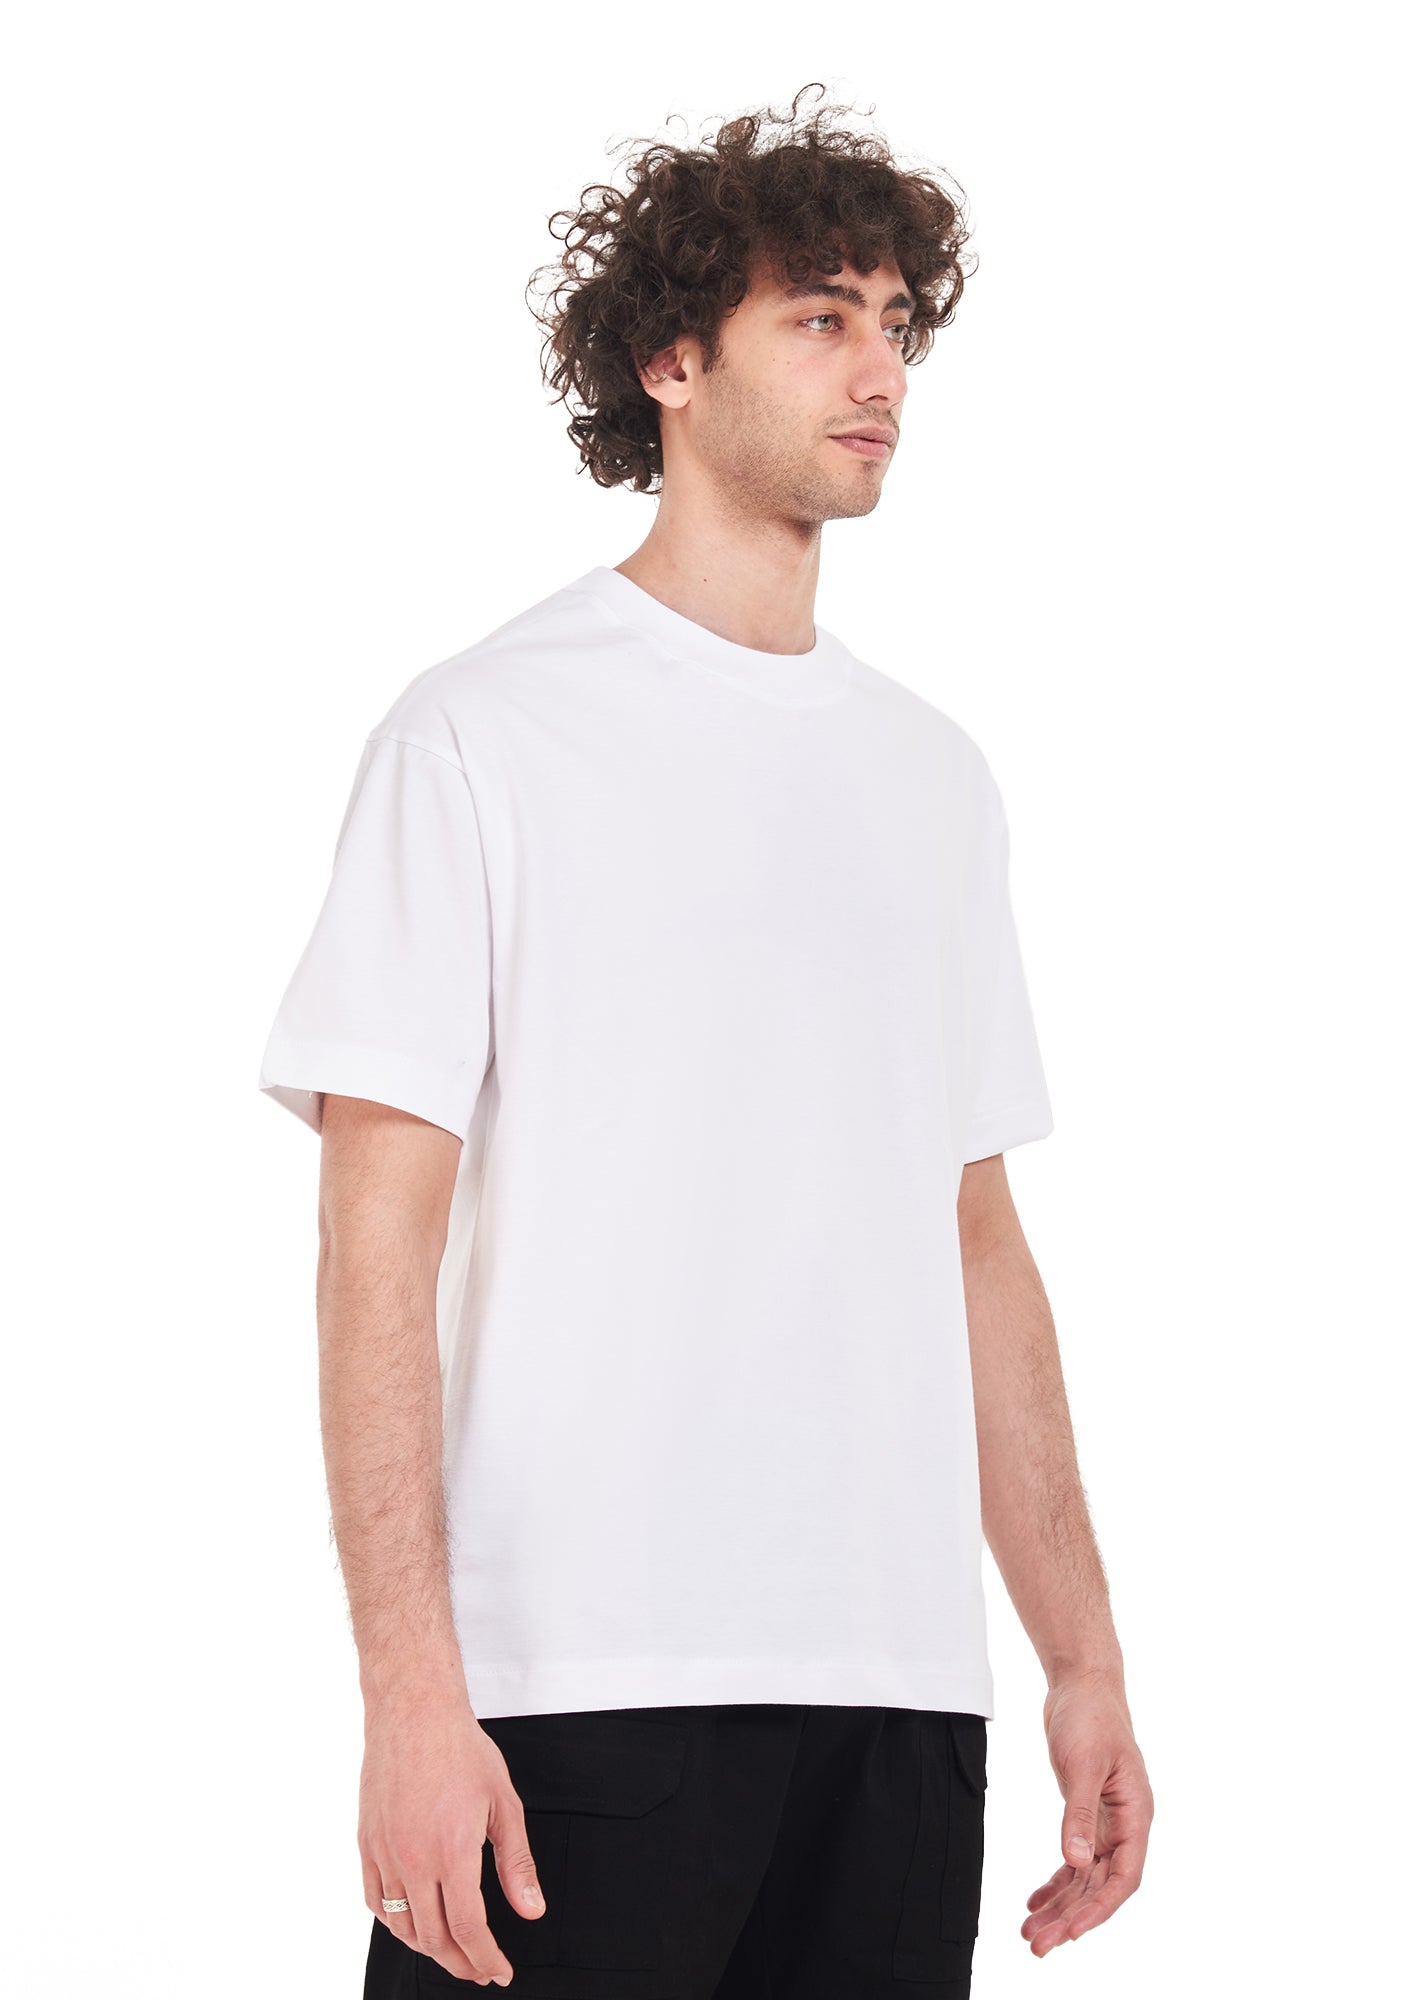 Stay Brave tee Oversized printed White T-shirt .